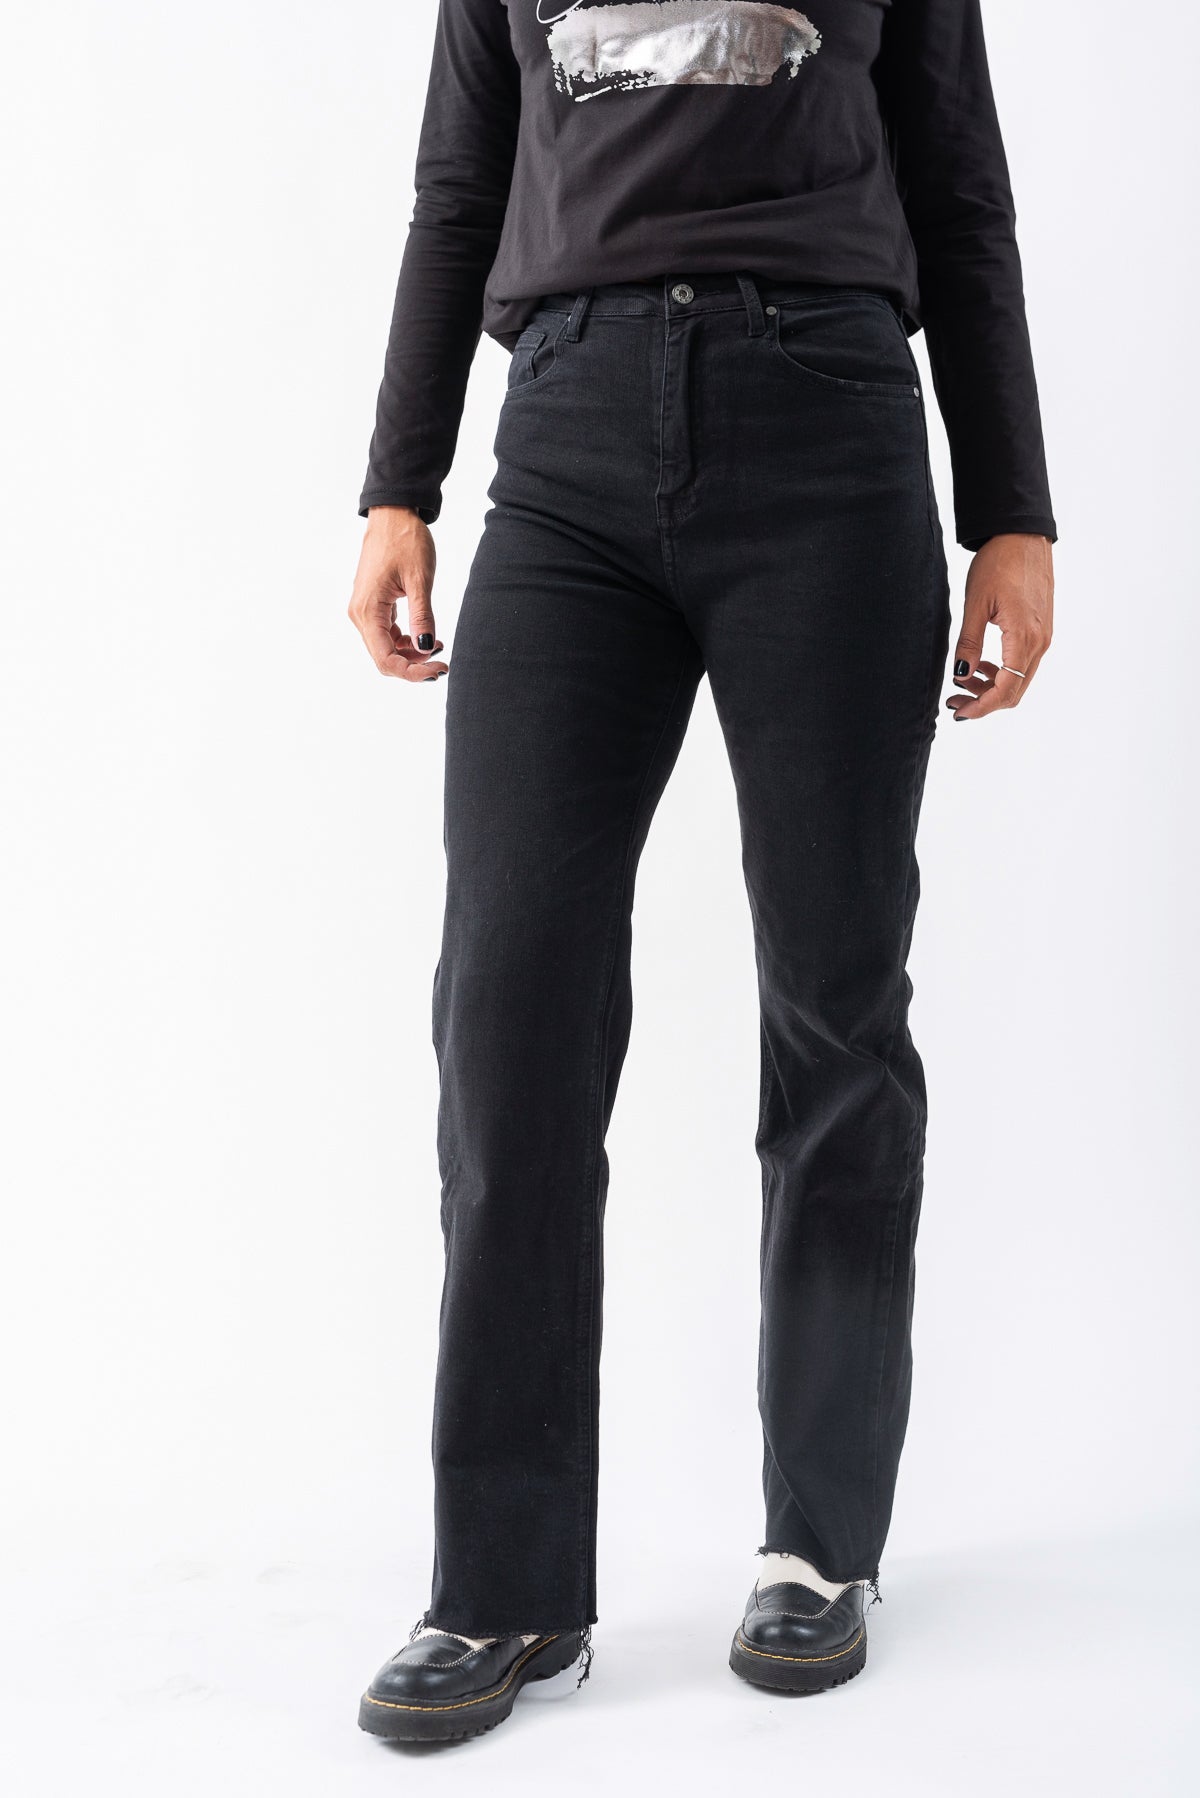 Jeans Ancho Negro